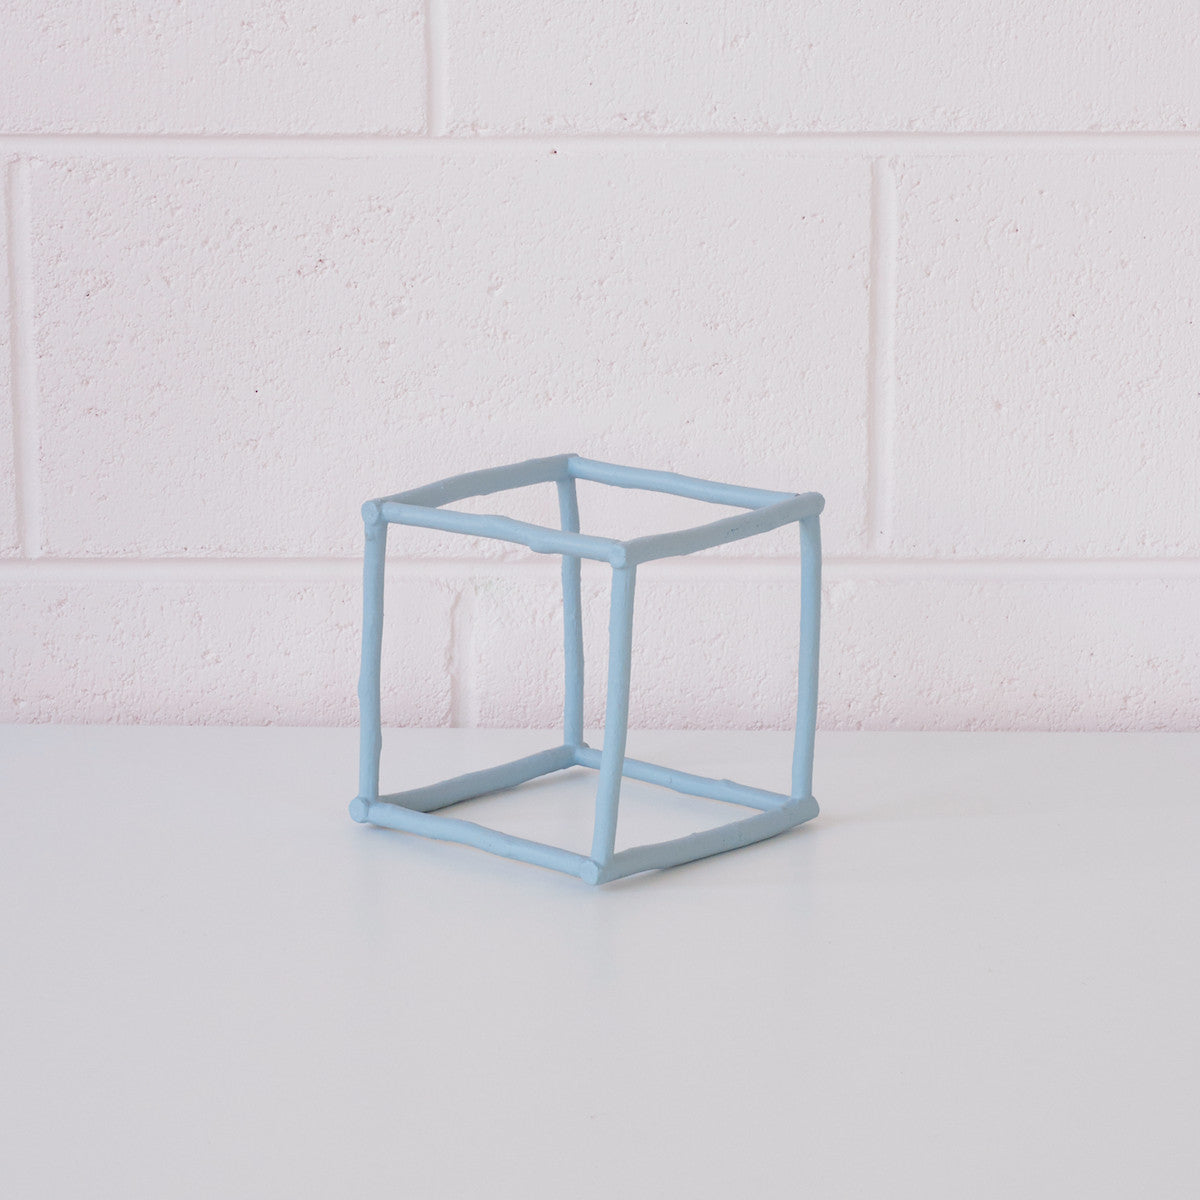 Twig Cube by Twiggargerie